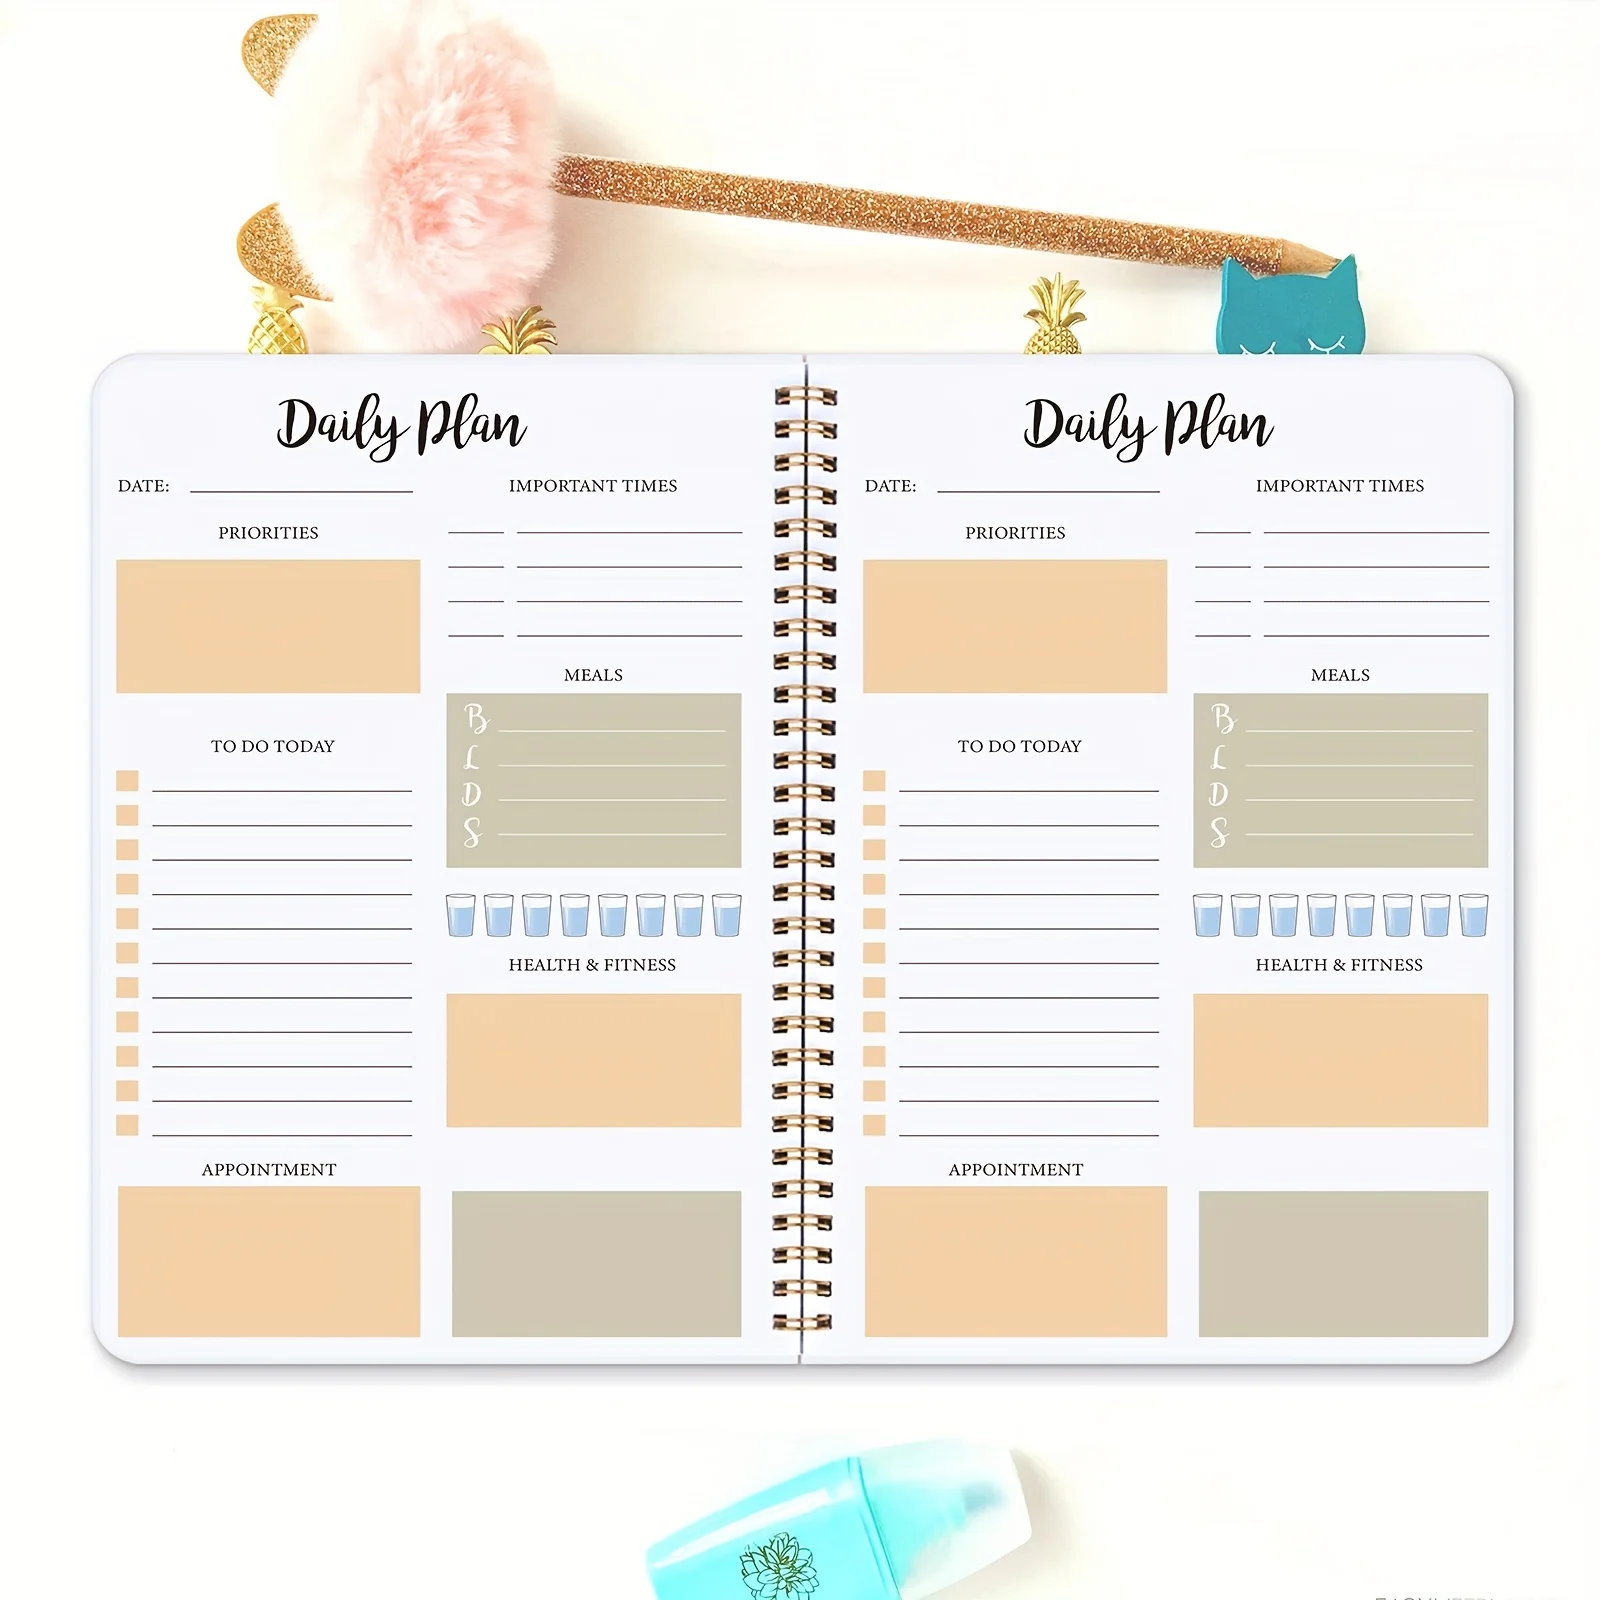 Daily Planner  List Tasks mportant Time Management and Meal Plan Efficiently Organize and Prioritize Boost Your Productivity